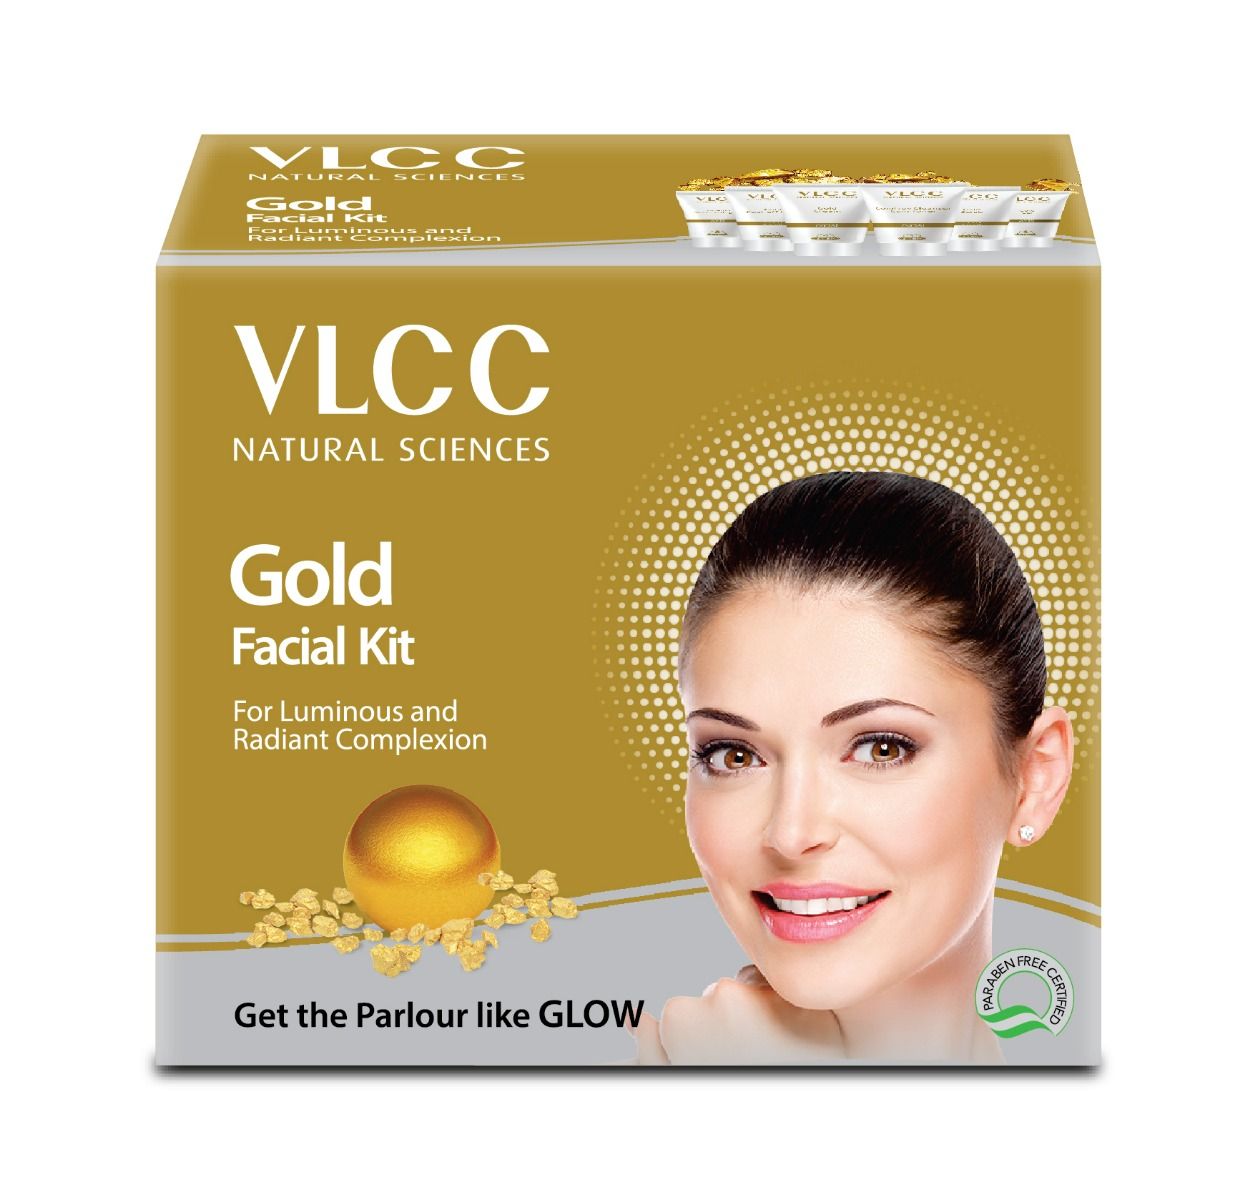 VLCC Gold Facial Kit, 1 Count, Pack of 1 